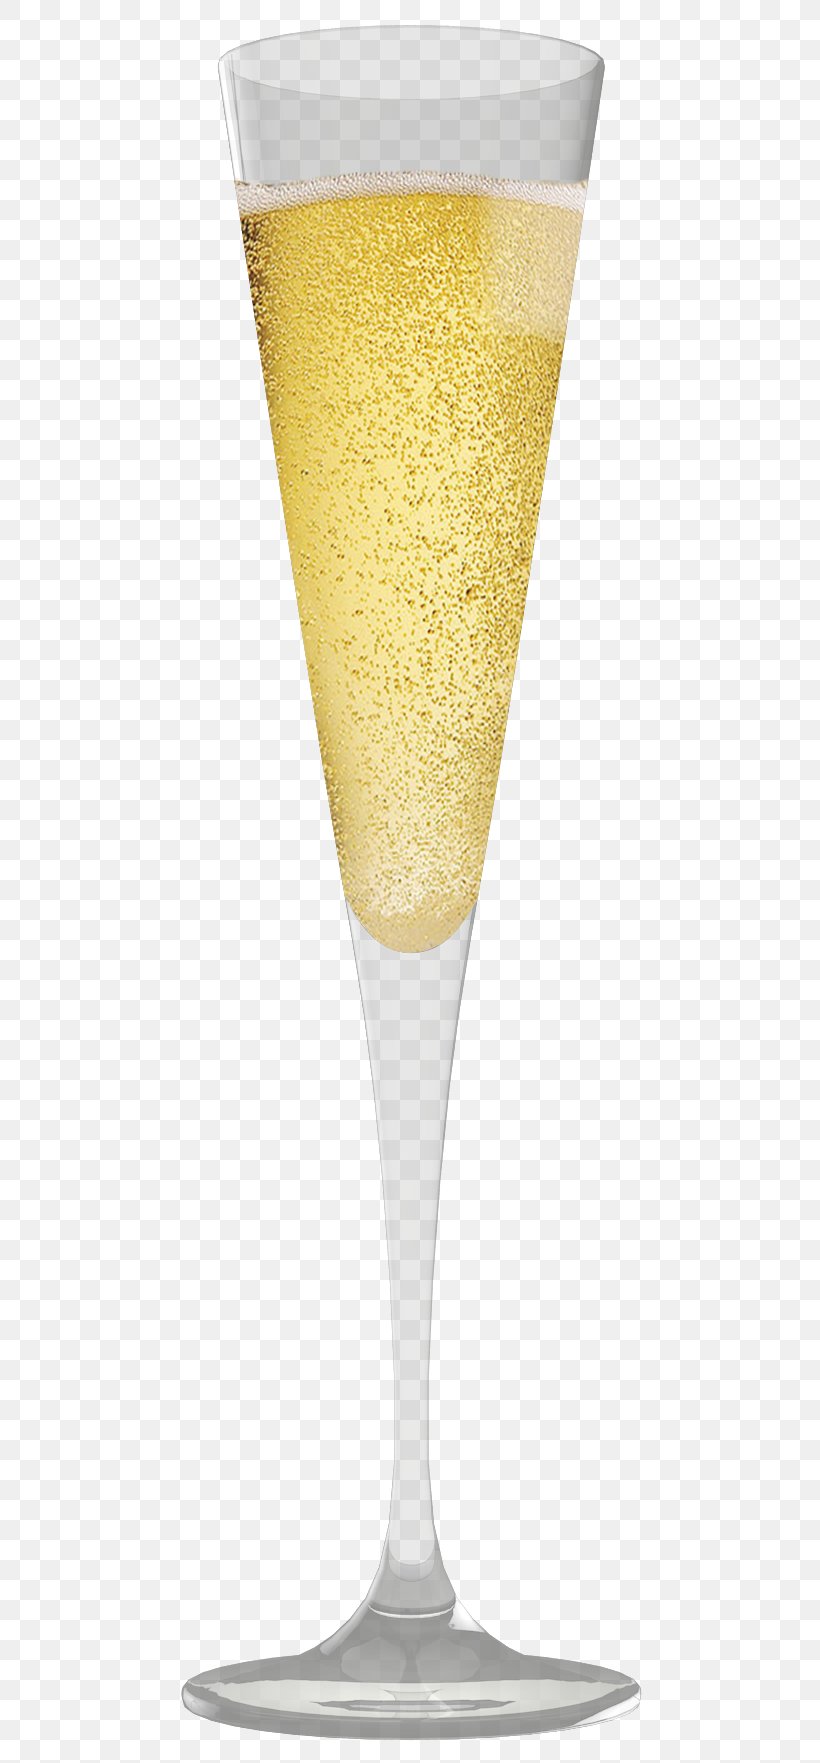 Wine Glass Champagne Cocktail Champagne Glass Clip Art, PNG, 521x1763px, Wine Glass, Alcoholic Beverages, Champagne, Champagne Cocktail, Champagne Glass Download Free